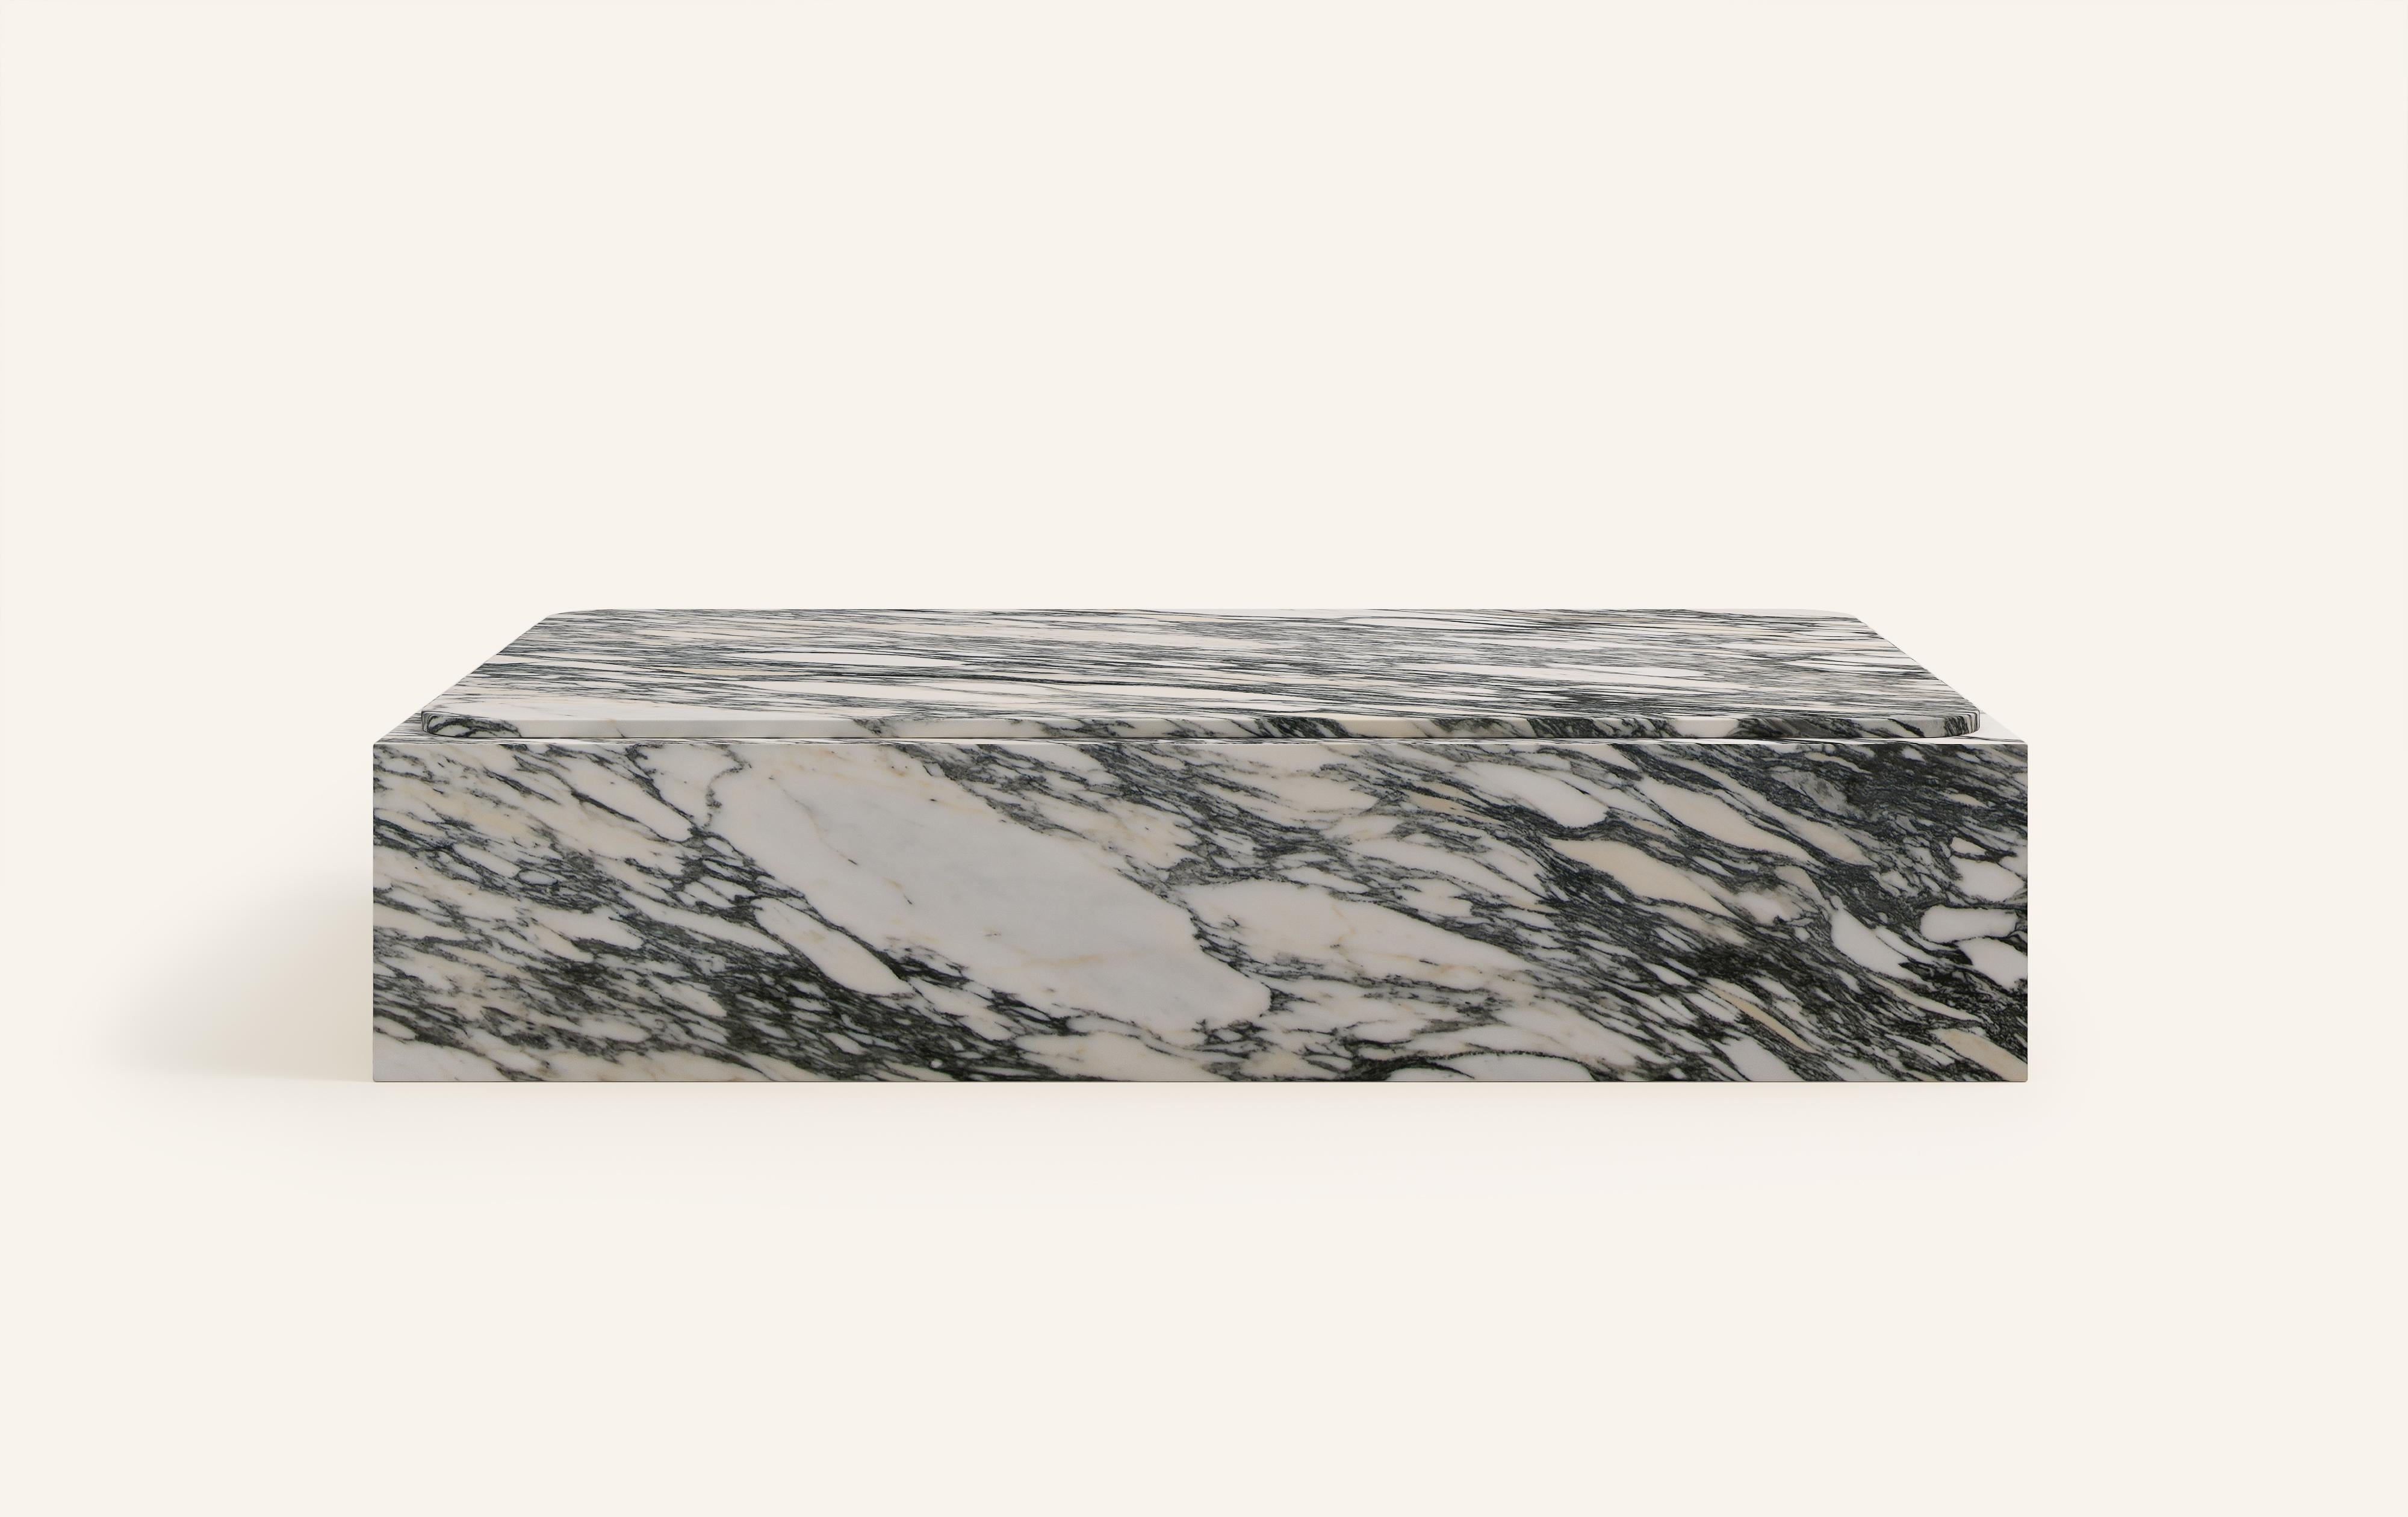 MONOLITHIC FORMS SOFTENED BY GENTLE EDGES. WITH ITS BOLD MARBLE PATTERNS CUBO IS AS VERSATILE AS IT IS STRIKING.

DIMENSIONS:
60”L x 36”W x 13”H: 
- 3/4